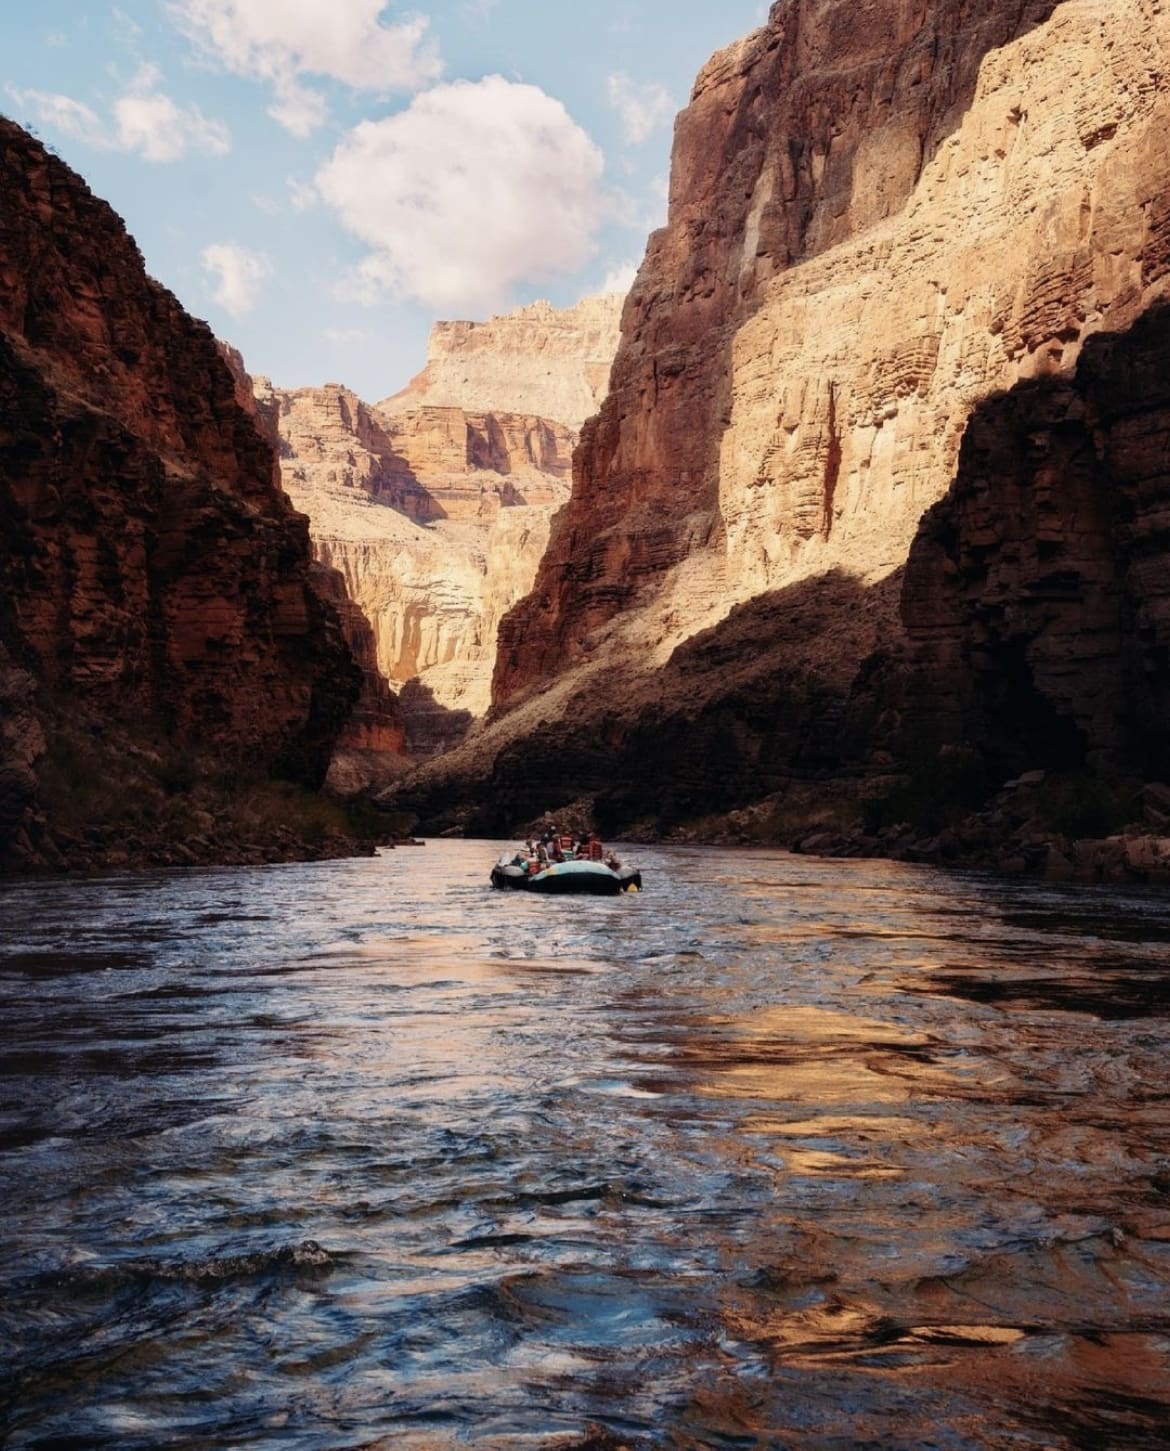 Rafting between the canyons